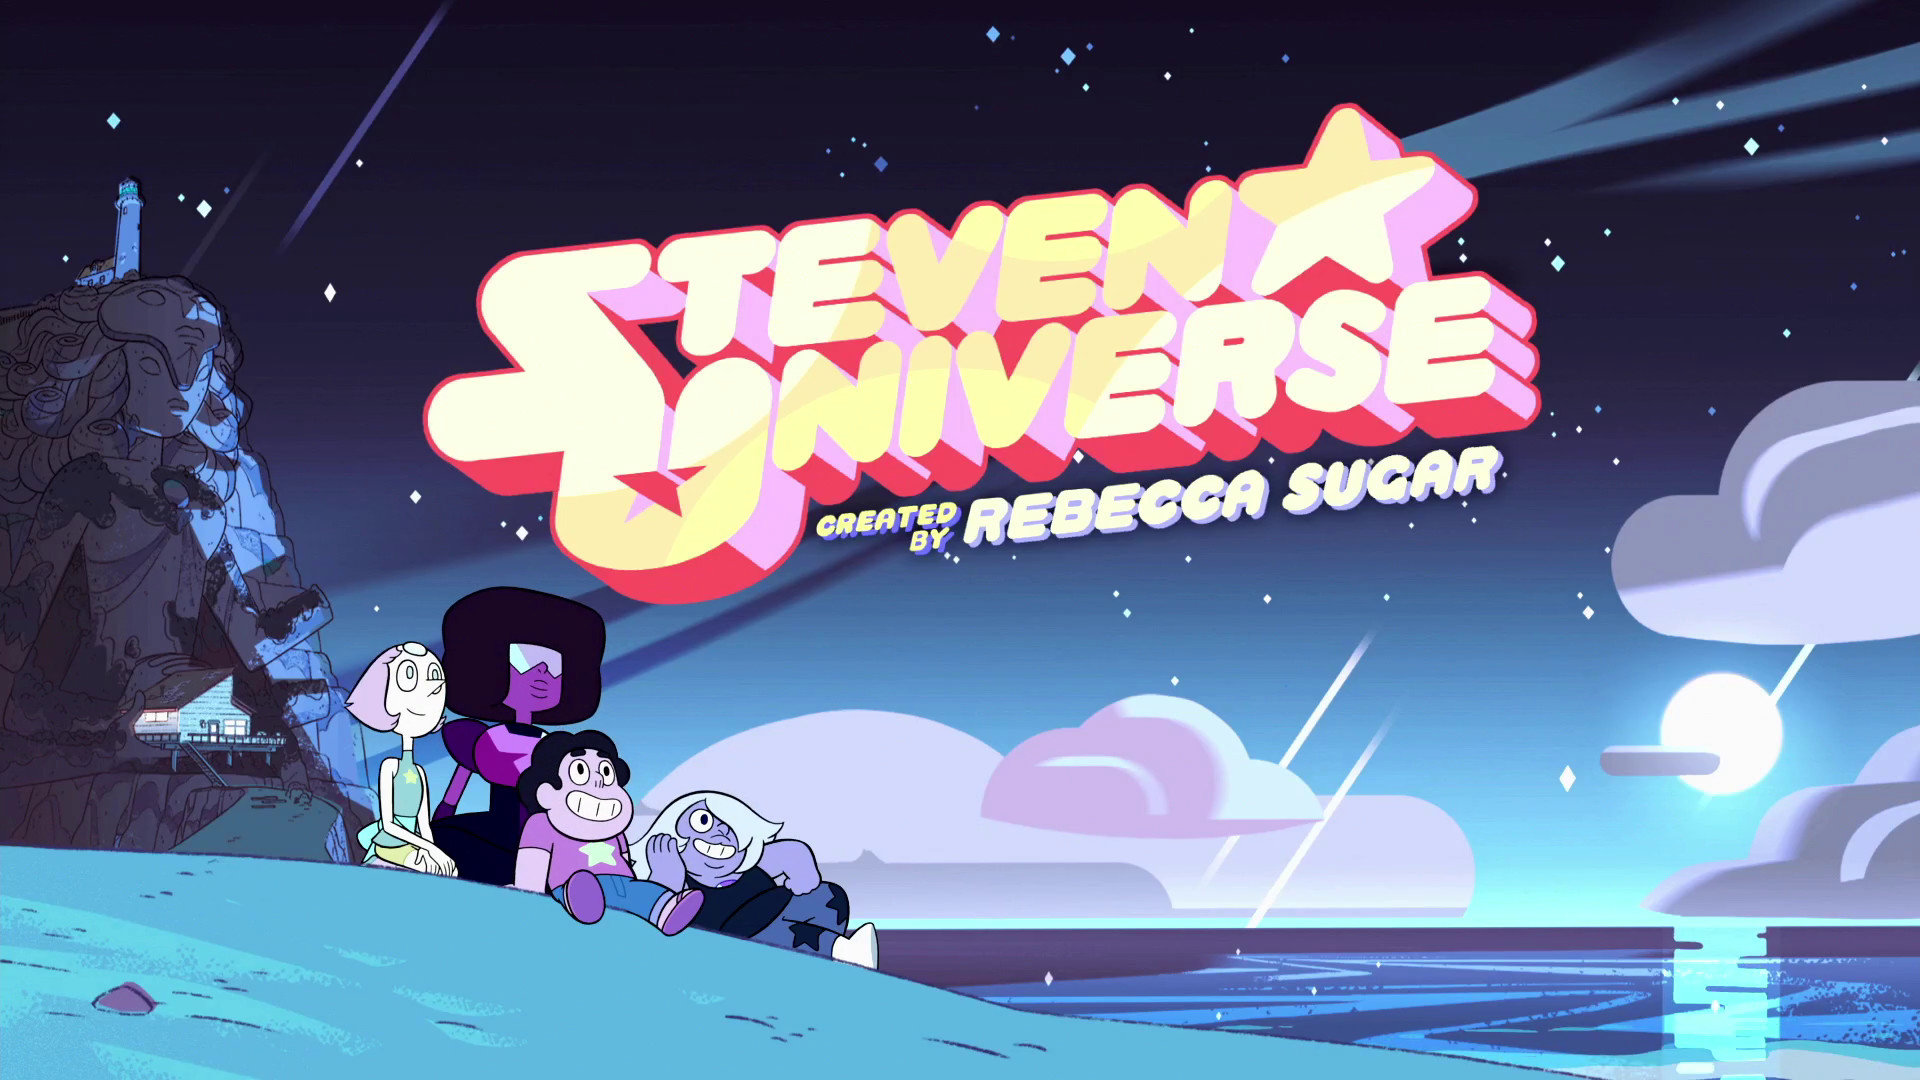 Awesome Steven Universe Free Wallpaper Id - Steven Universe Wallpaper 1920 X 1080 - HD Wallpaper 